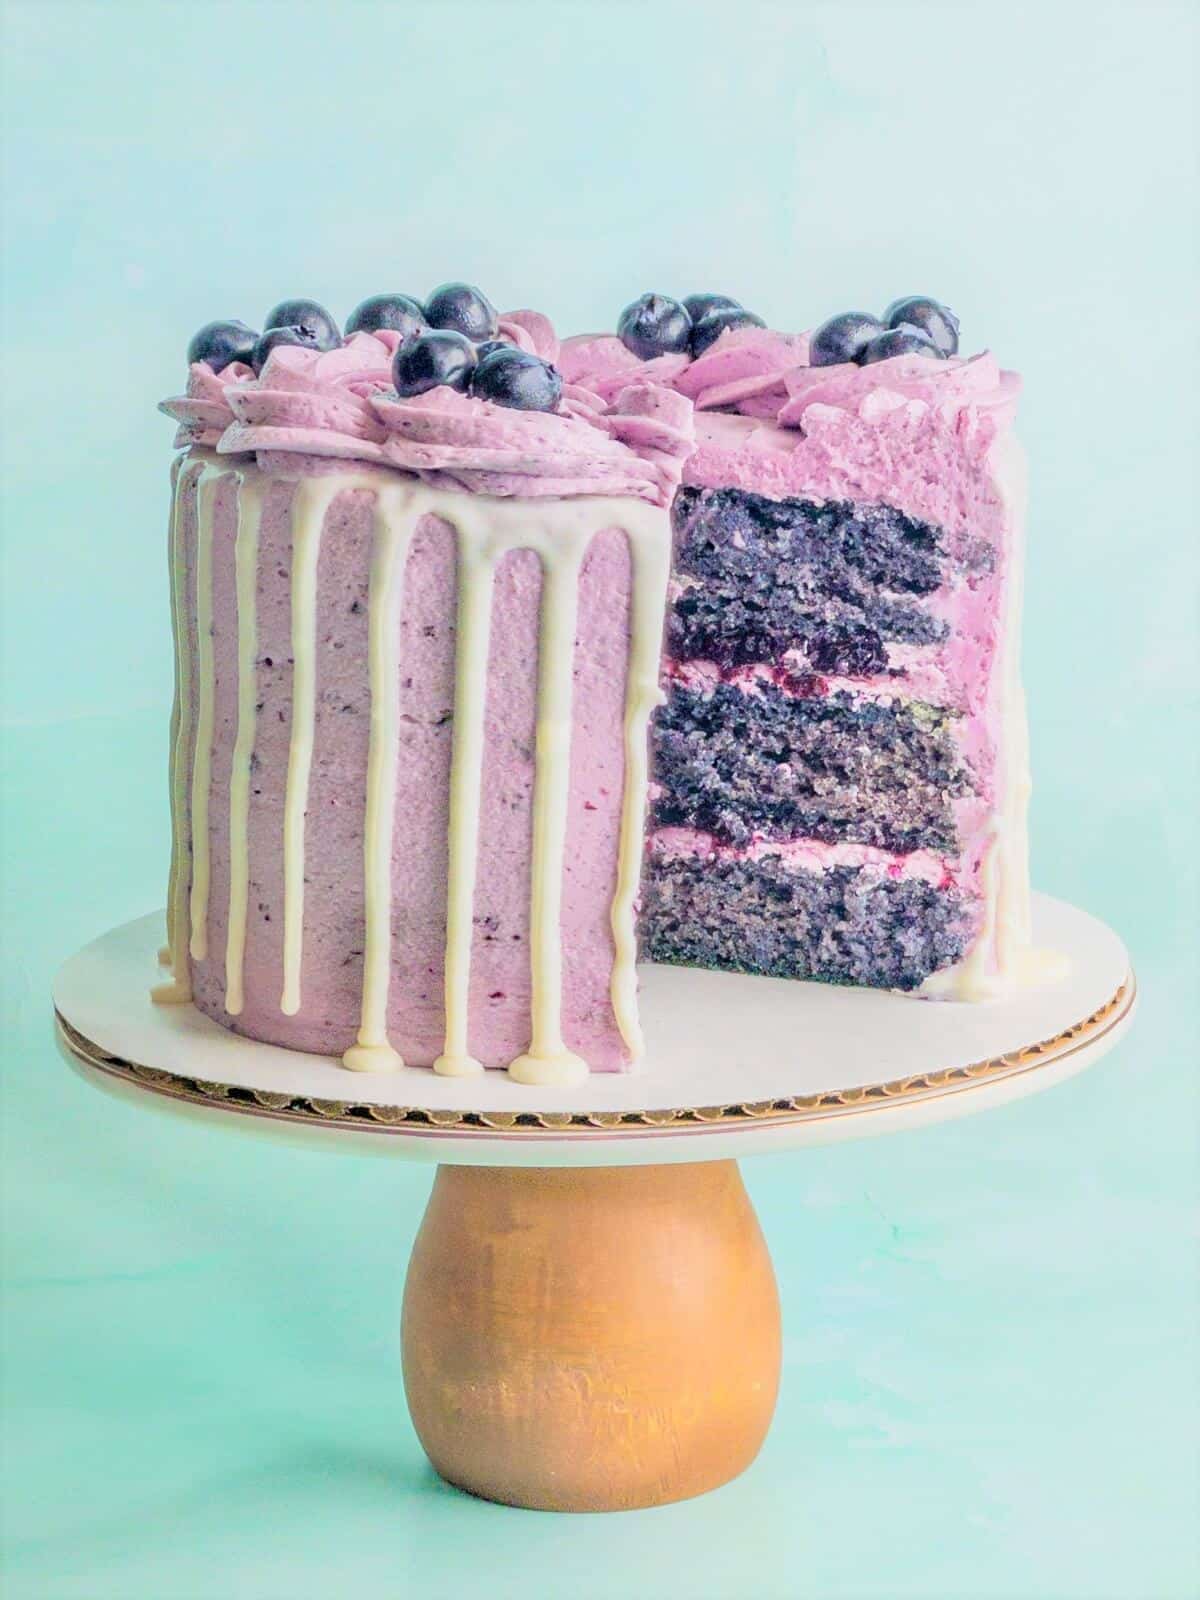 A beautiful blueberry cake on a cake pedestal cut open showing three layers of cake, blueberry filling and blueberry frosting.